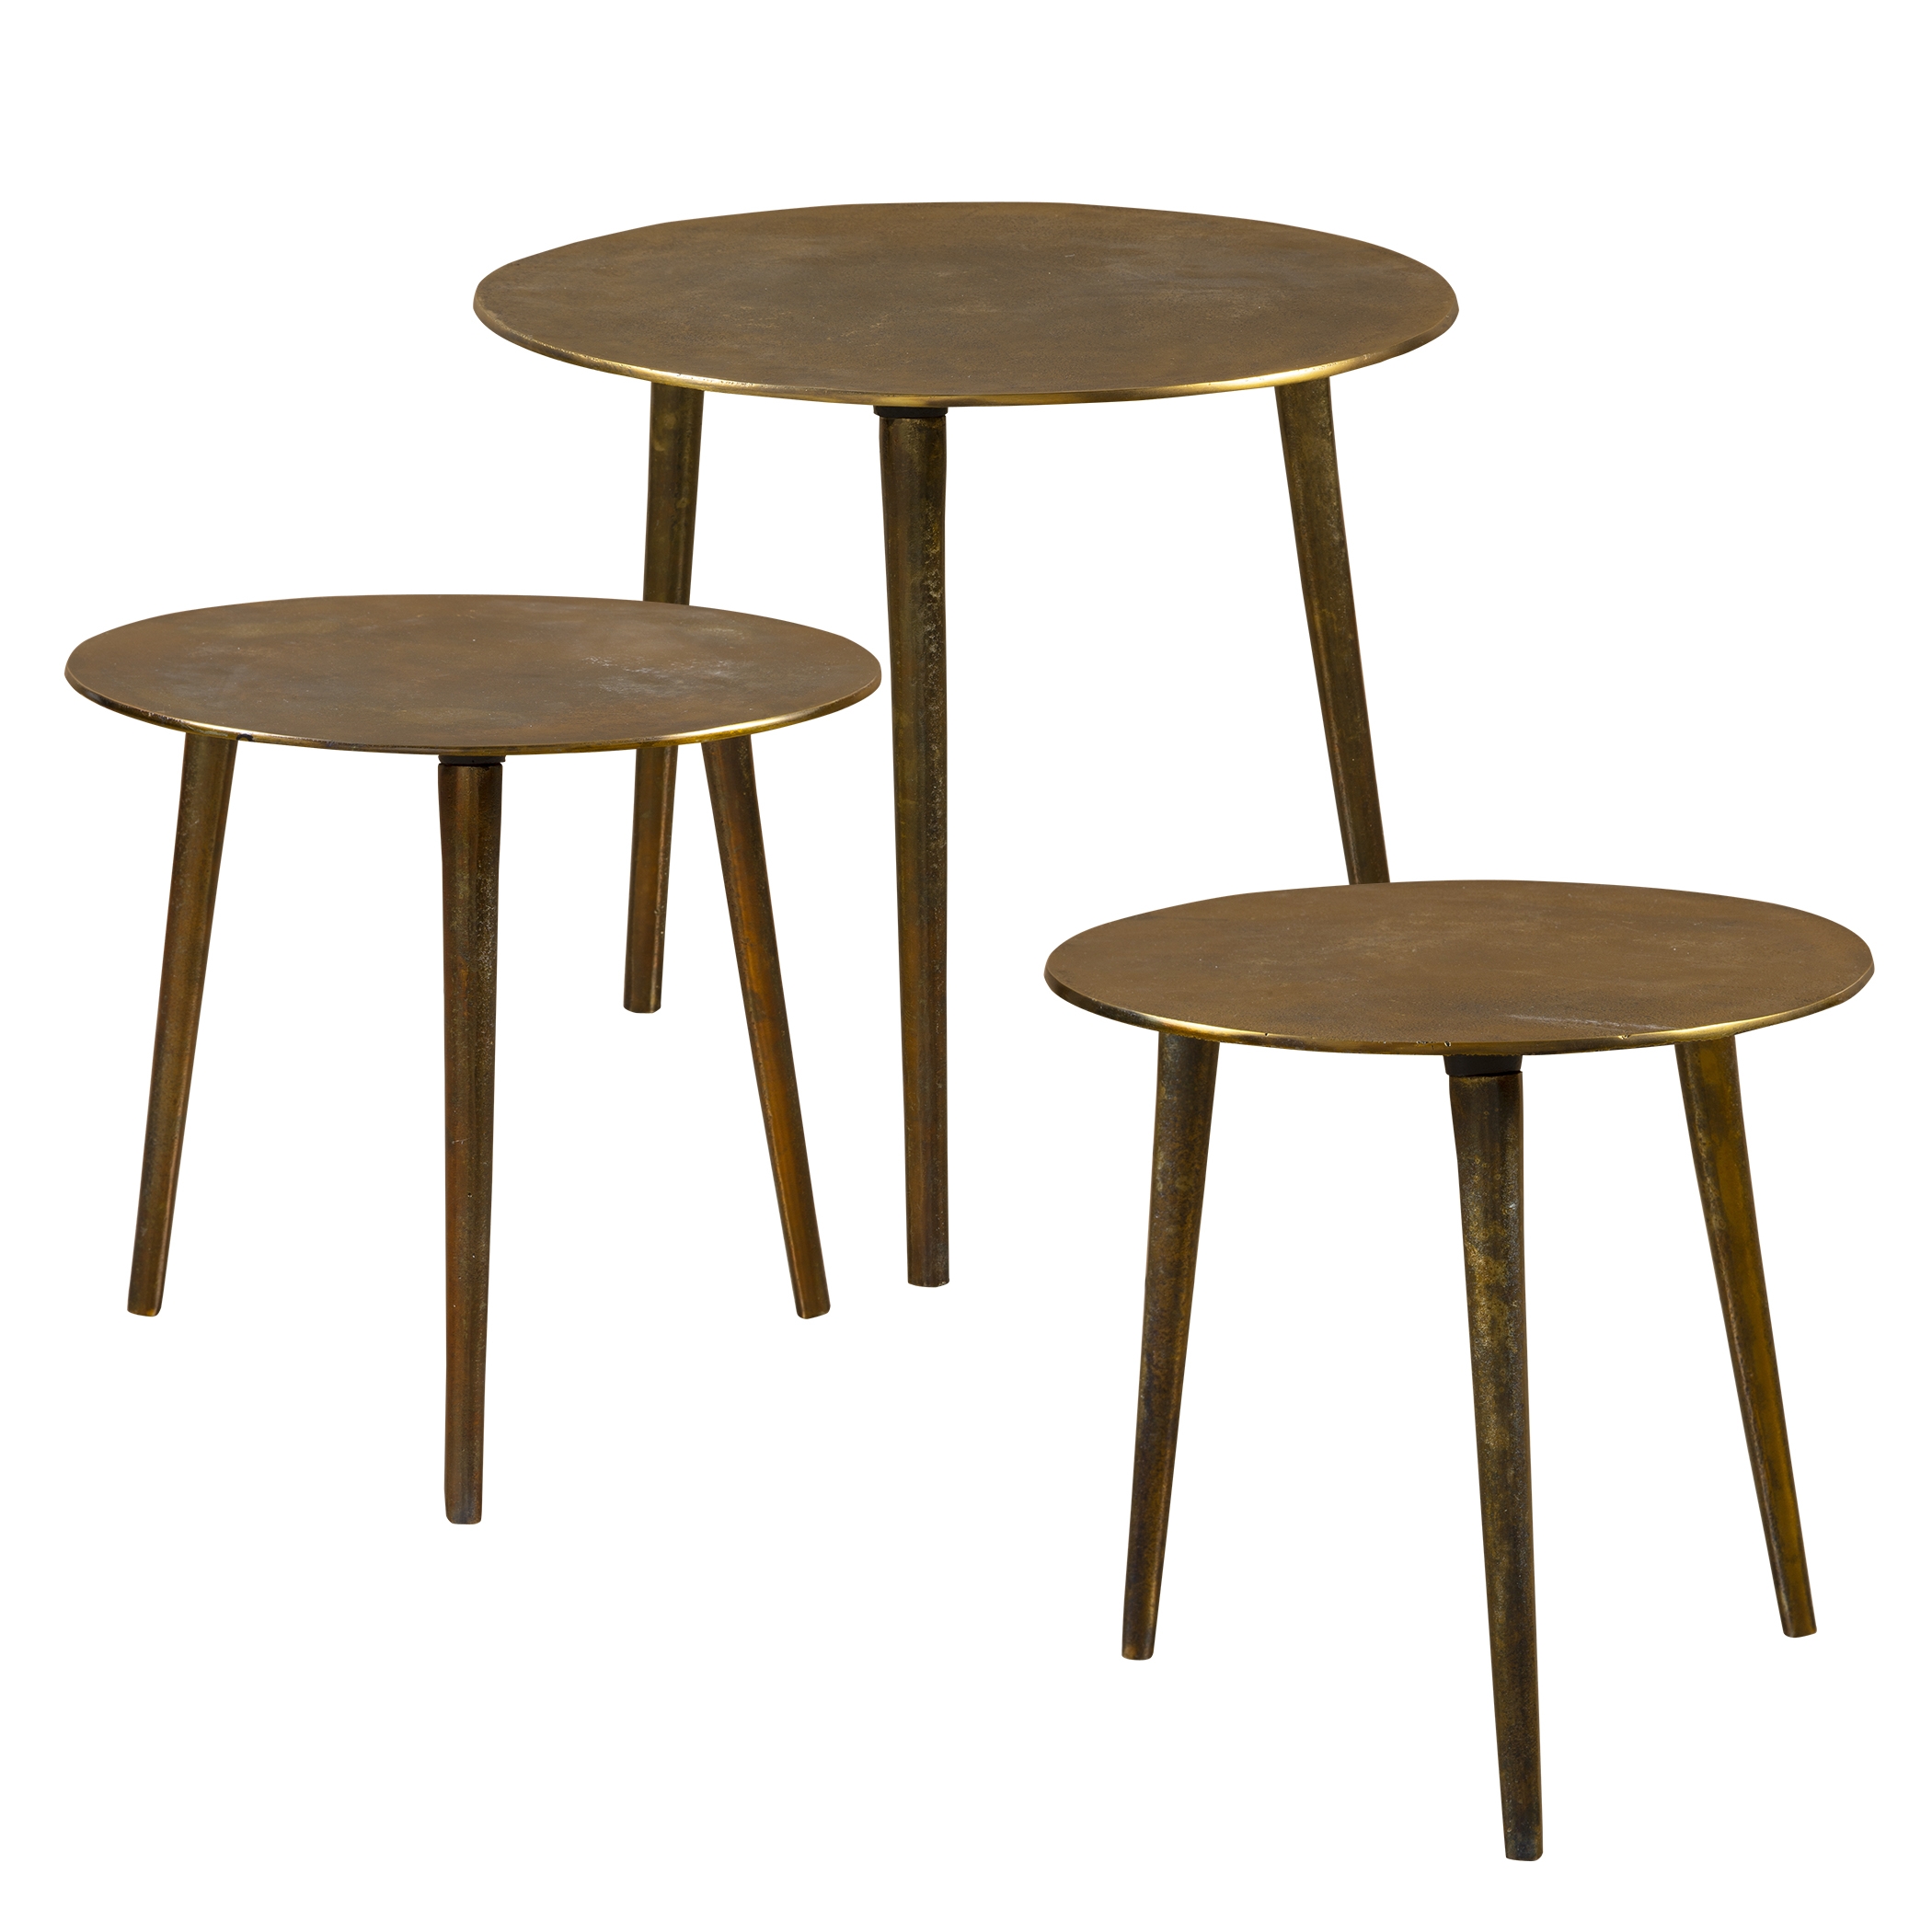 Kasai Gold Coffee Tables, S/3 - Image 1